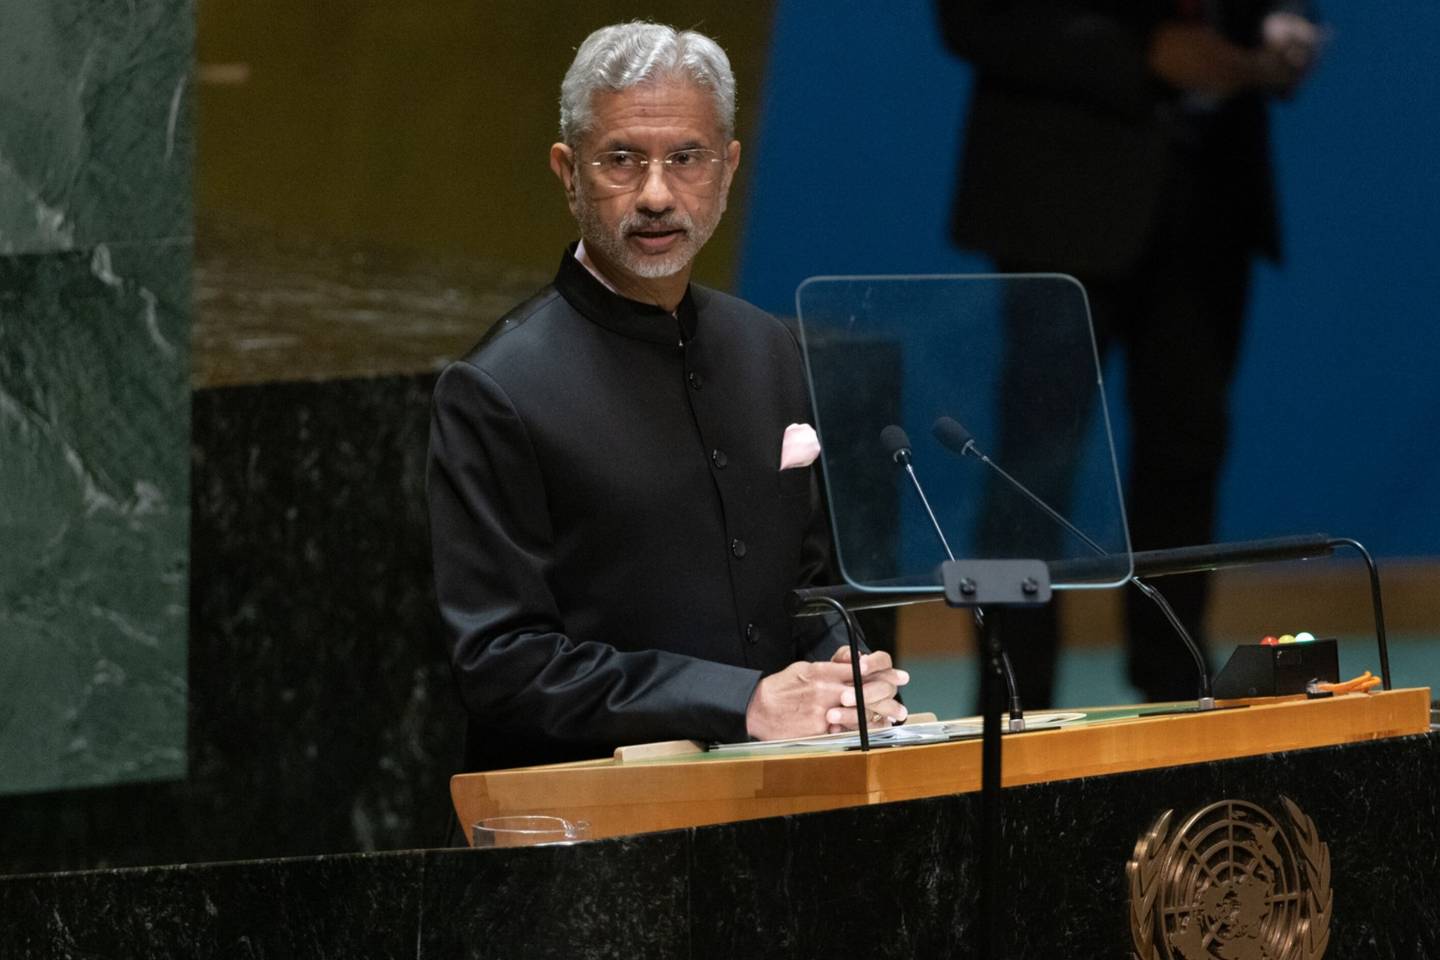 India calls for UN Security Council reform as it 'aspires to be a leading power'